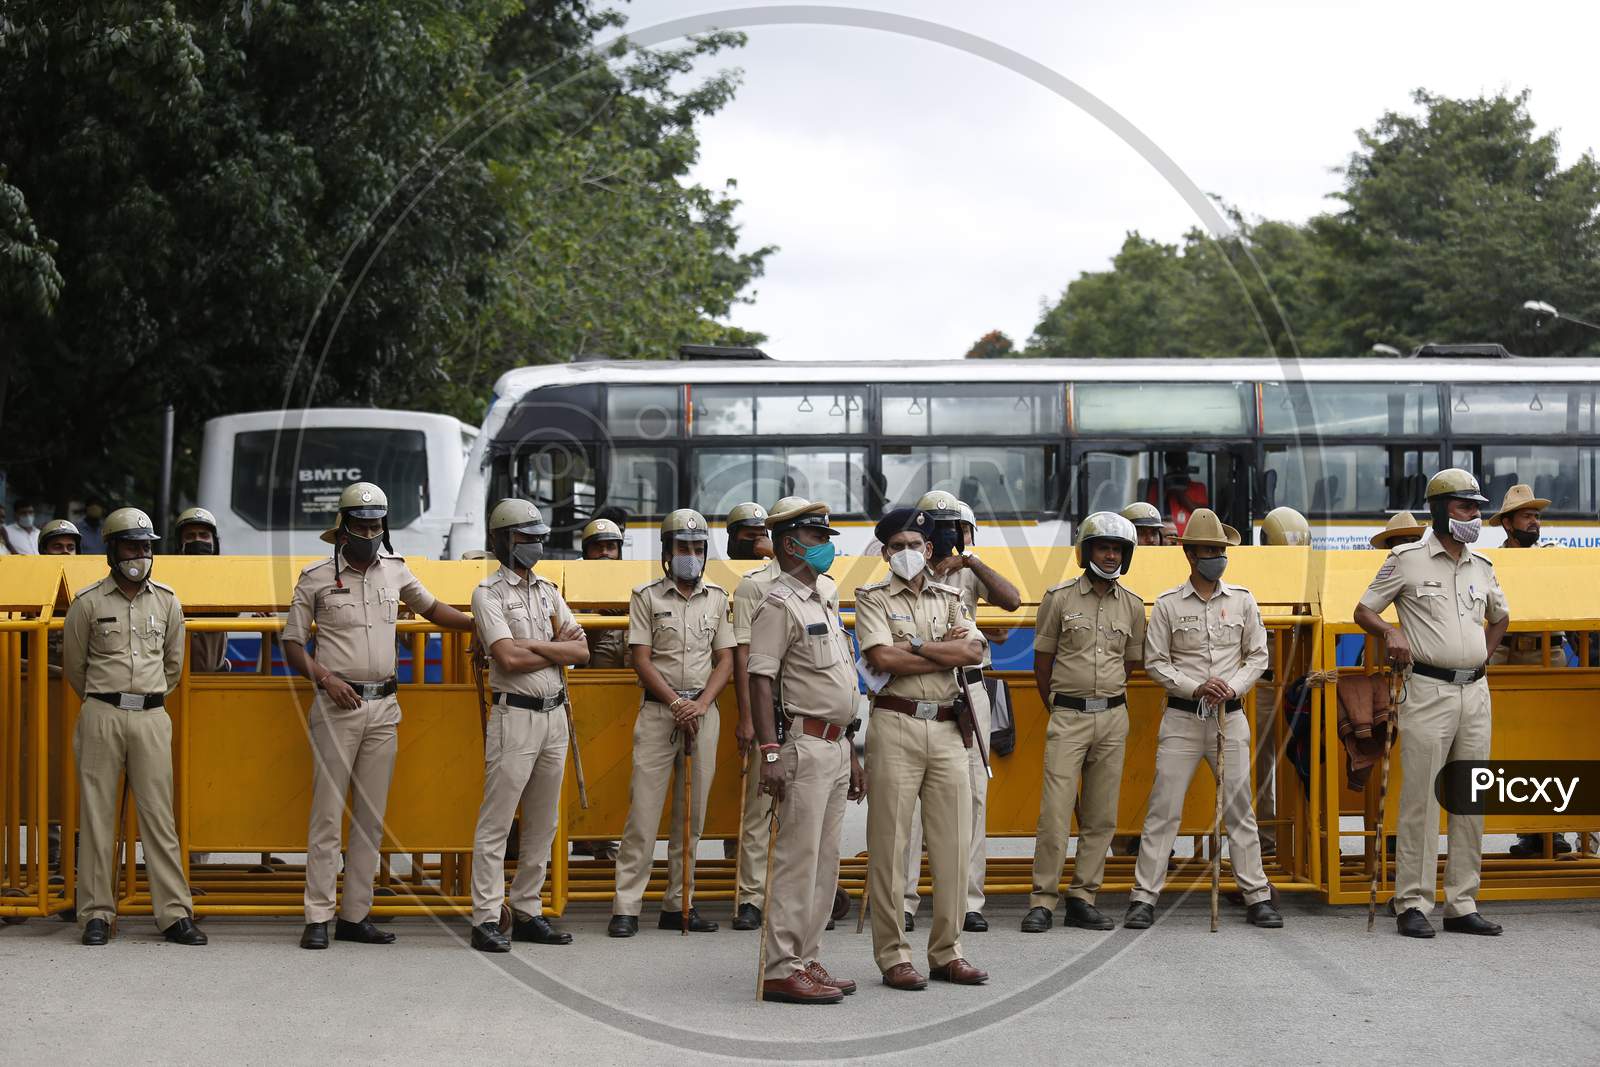 Police personnel stand guard during a farmers protest against the passage of two controversial farm bills by the country’s parliament in Bangalore, India.